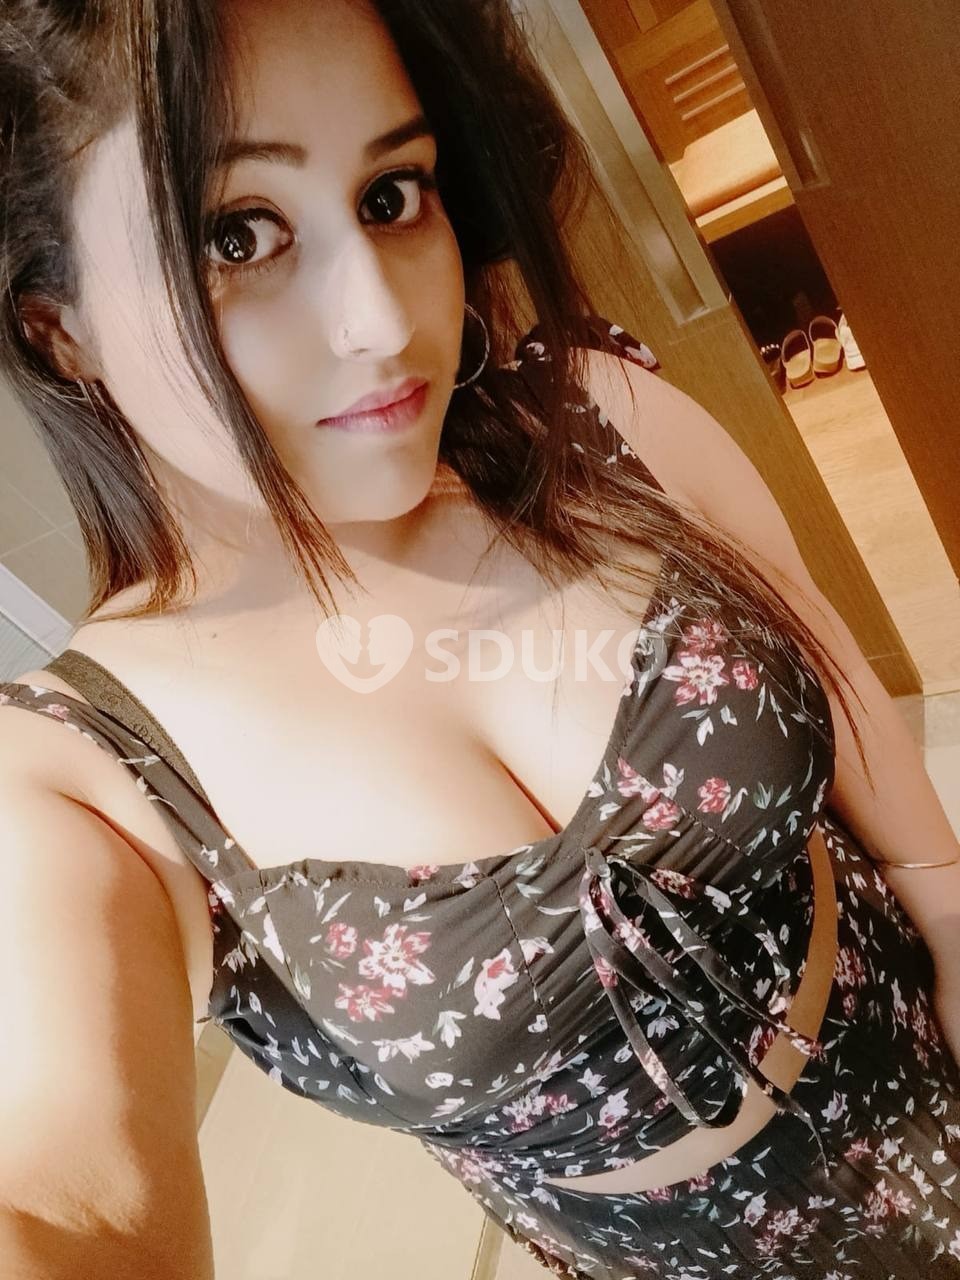 DWARKA HOME AND ❤ HOTEL SERVICE FULL SAFE AND SECURE SERVICE AVAILABLE CALL ME KAJAL 21